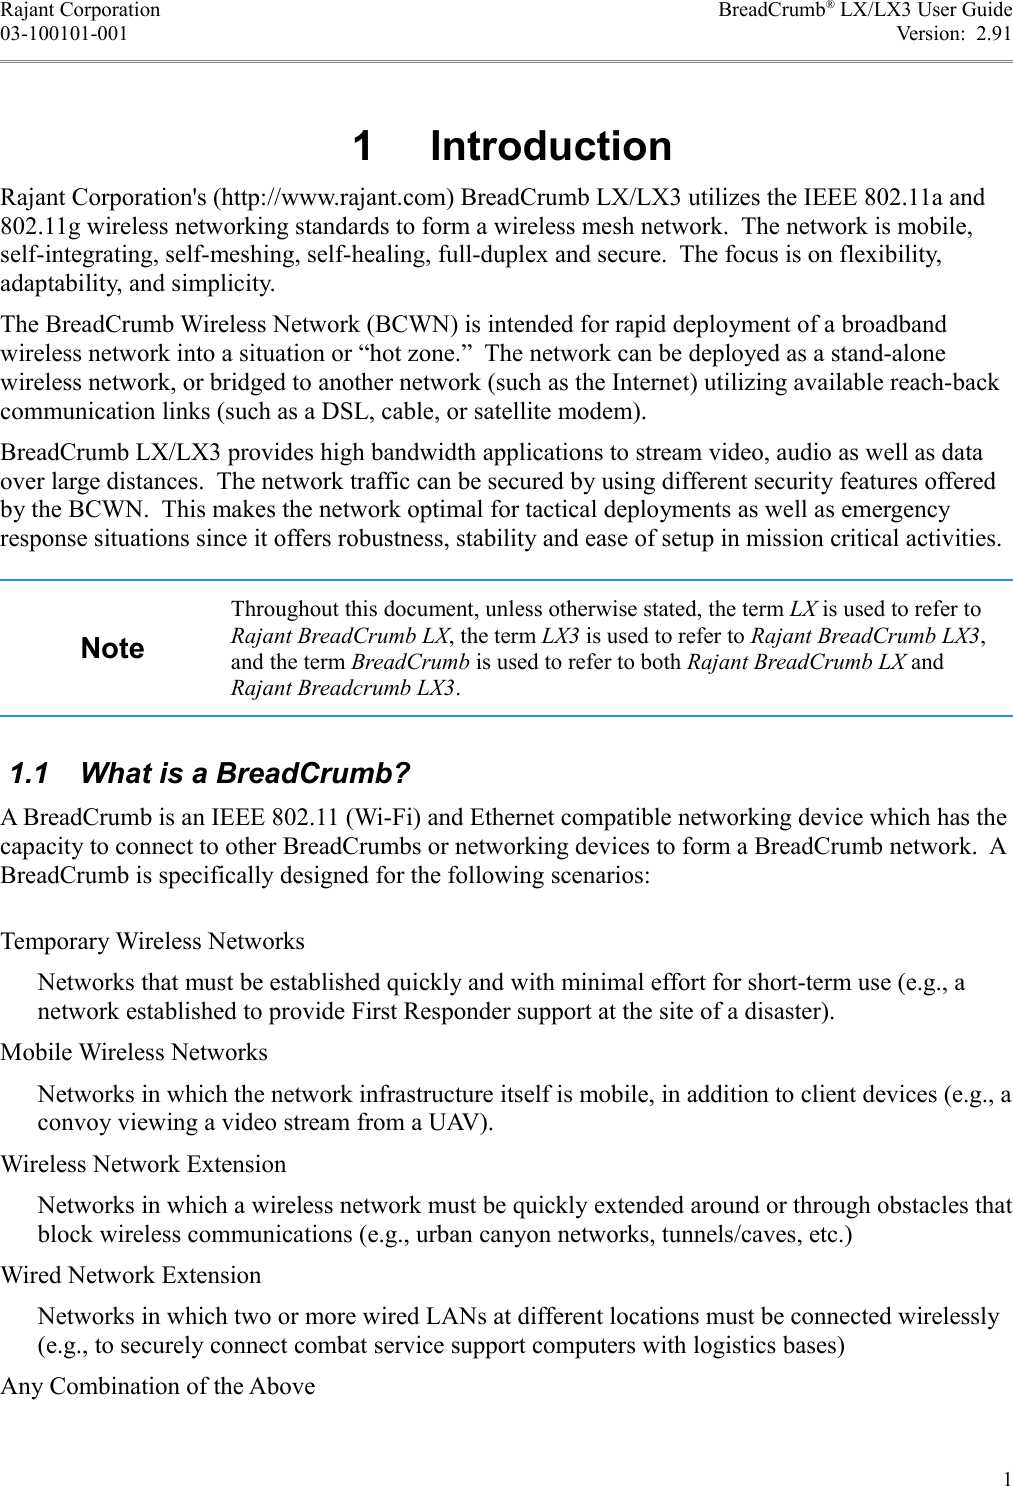 Rajant Corporation BreadCrumb® LX/LX3 User Guide03-100101-001 Version:  2.91 1  IntroductionRajant Corporation&apos;s (http://www.rajant.com) BreadCrumb LX/LX3 utilizes the IEEE 802.11a and 802.11g wireless networking standards to form a wireless mesh network.  The network is mobile, self-integrating, self-meshing, self-healing, full-duplex and secure.  The focus is on flexibility, adaptability, and simplicity.The BreadCrumb Wireless Network (BCWN) is intended for rapid deployment of a broadband wireless network into a situation or “hot zone.”  The network can be deployed as a stand-alone wireless network, or bridged to another network (such as the Internet) utilizing available reach-back communication links (such as a DSL, cable, or satellite modem).BreadCrumb LX/LX3 provides high bandwidth applications to stream video, audio as well as data over large distances.  The network traffic can be secured by using different security features offered by the BCWN.  This makes the network optimal for tactical deployments as well as emergency response situations since it offers robustness, stability and ease of setup in mission critical activities. NoteThroughout this document, unless otherwise stated, the term LX is used to refer to Rajant BreadCrumb LX, the term LX3 is used to refer to Rajant BreadCrumb LX3, and the term BreadCrumb is used to refer to both Rajant BreadCrumb LX and Rajant Breadcrumb LX3. 1.1  What is a BreadCrumb?A BreadCrumb is an IEEE 802.11 (Wi-Fi) and Ethernet compatible networking device which has the capacity to connect to other BreadCrumbs or networking devices to form a BreadCrumb network.  A BreadCrumb is specifically designed for the following scenarios:Temporary Wireless NetworksNetworks that must be established quickly and with minimal effort for short-term use (e.g., a network established to provide First Responder support at the site of a disaster).Mobile Wireless NetworksNetworks in which the network infrastructure itself is mobile, in addition to client devices (e.g., a convoy viewing a video stream from a UAV).Wireless Network ExtensionNetworks in which a wireless network must be quickly extended around or through obstacles that block wireless communications (e.g., urban canyon networks, tunnels/caves, etc.)Wired Network ExtensionNetworks in which two or more wired LANs at different locations must be connected wirelessly (e.g., to securely connect combat service support computers with logistics bases)Any Combination of the Above1